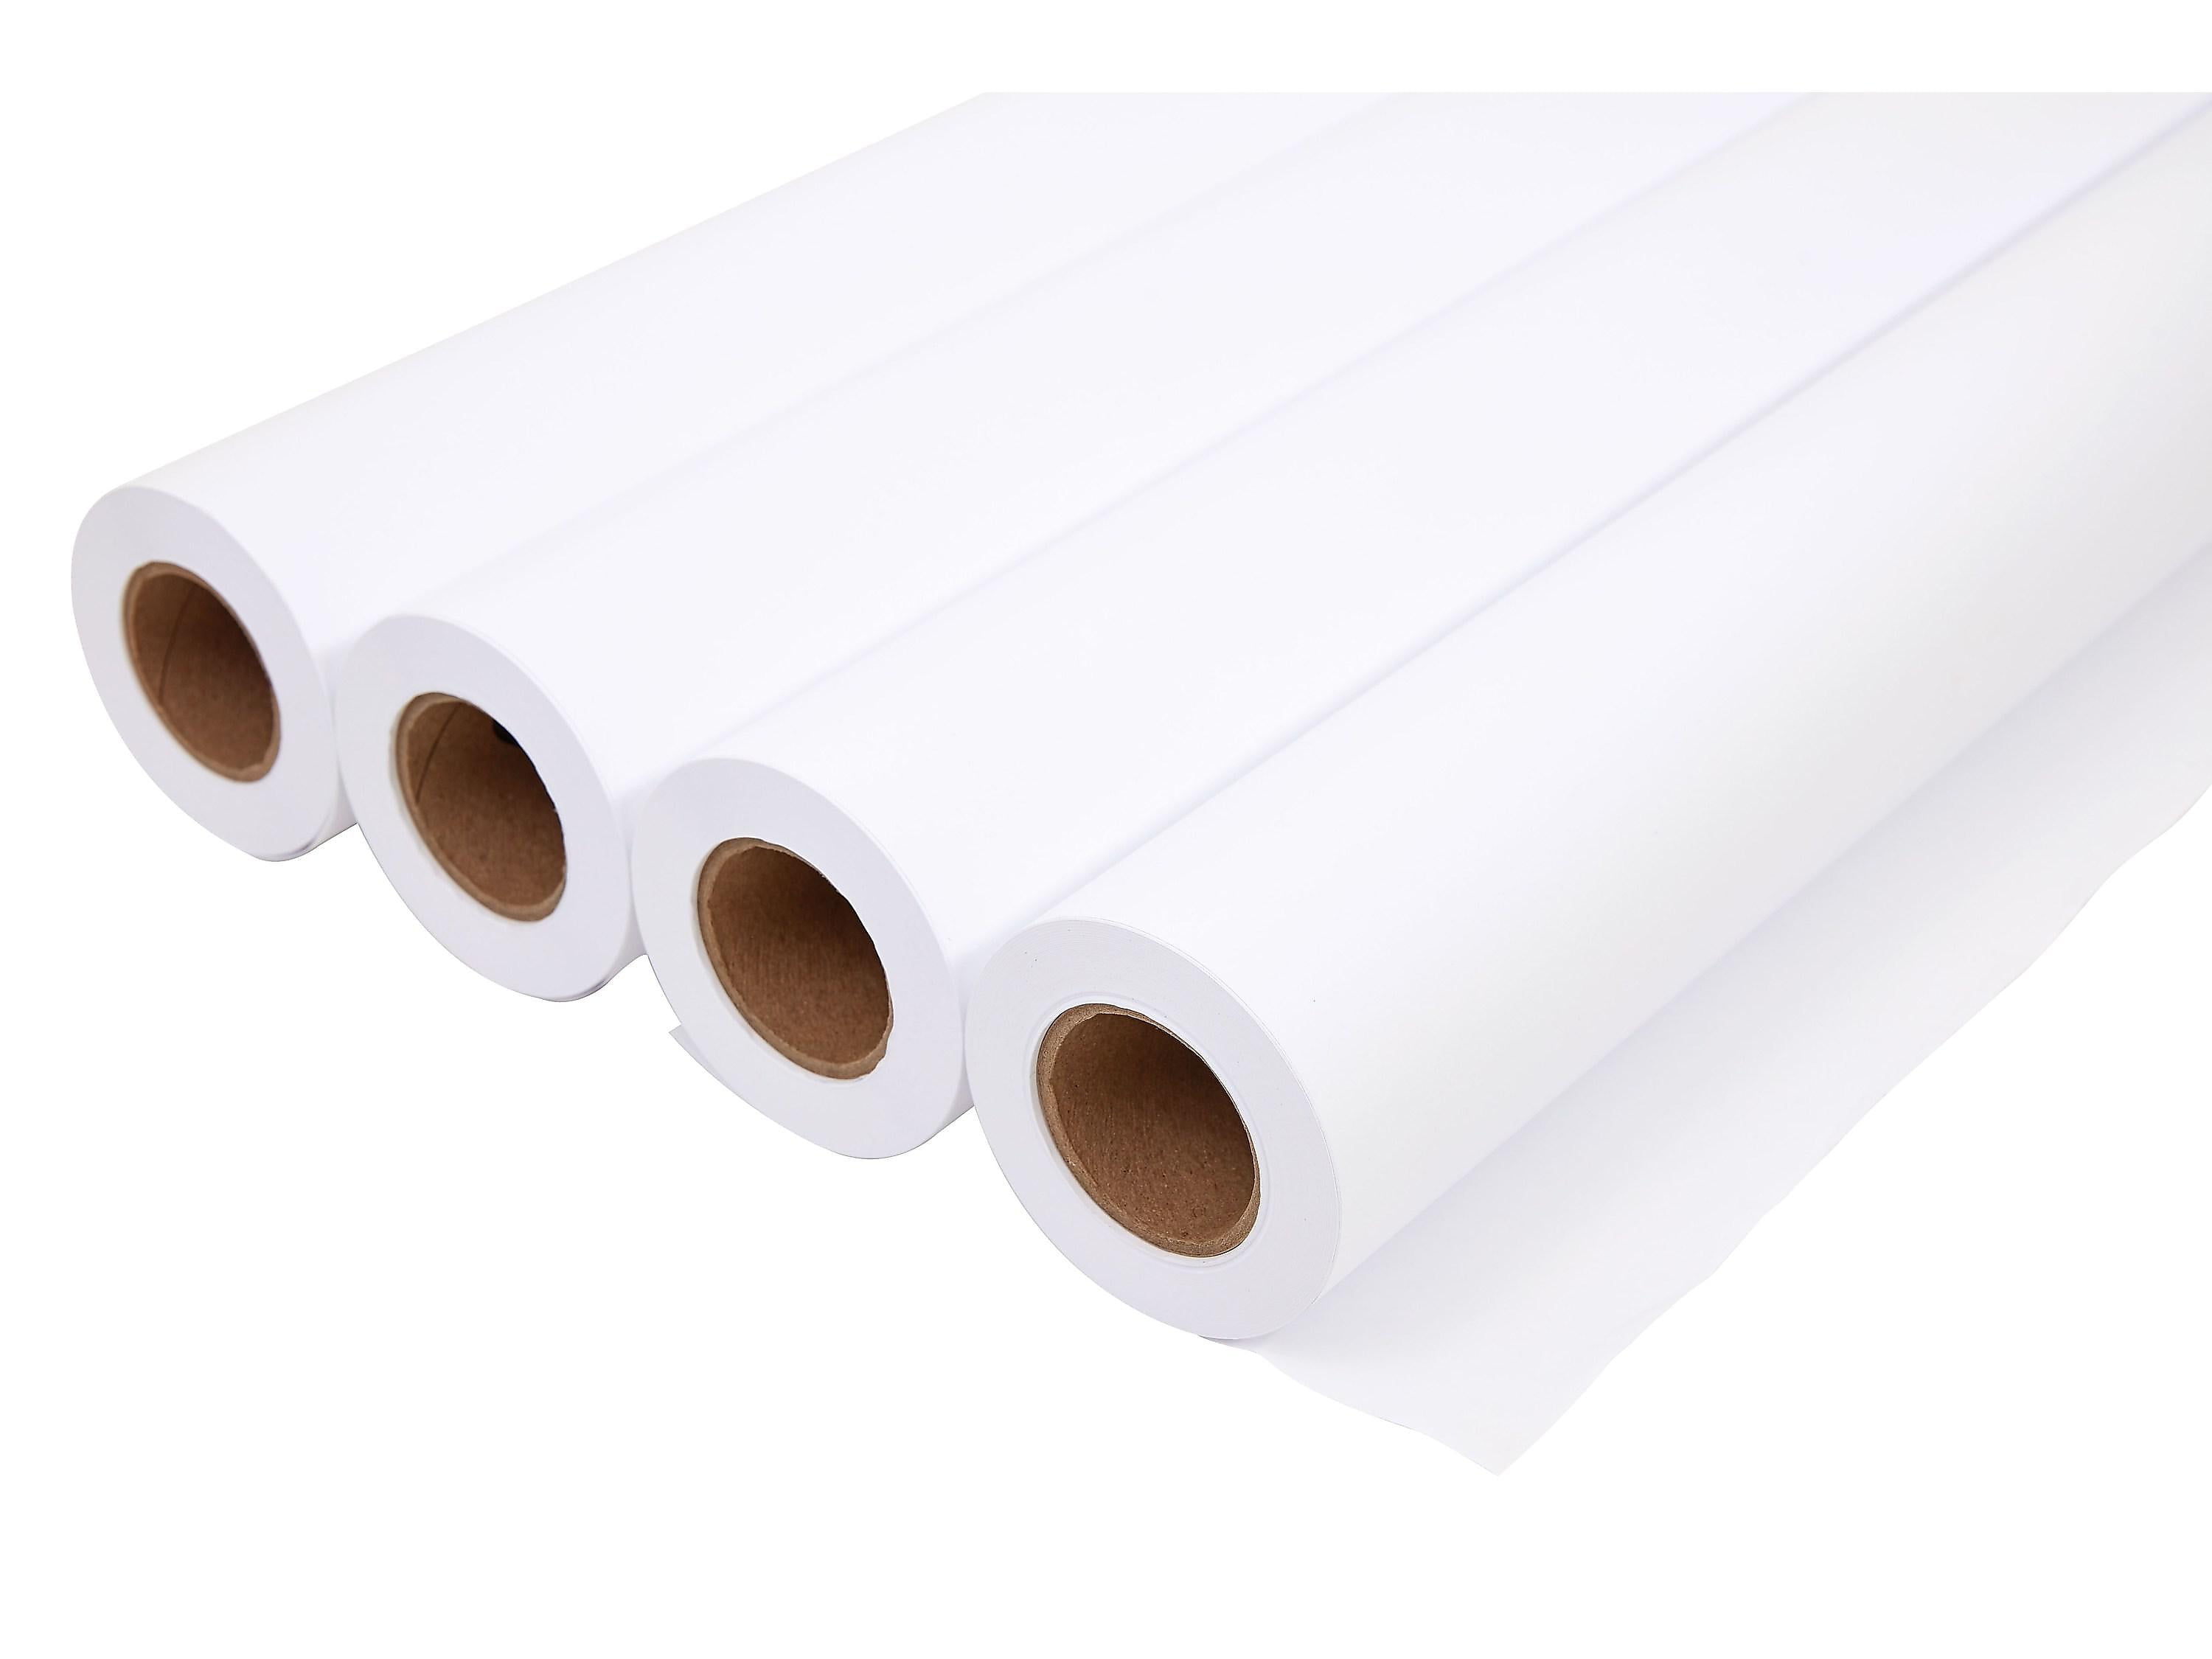 457mm x 610m Trade Cling Wrap Roll - Bonnie Biodegradable website